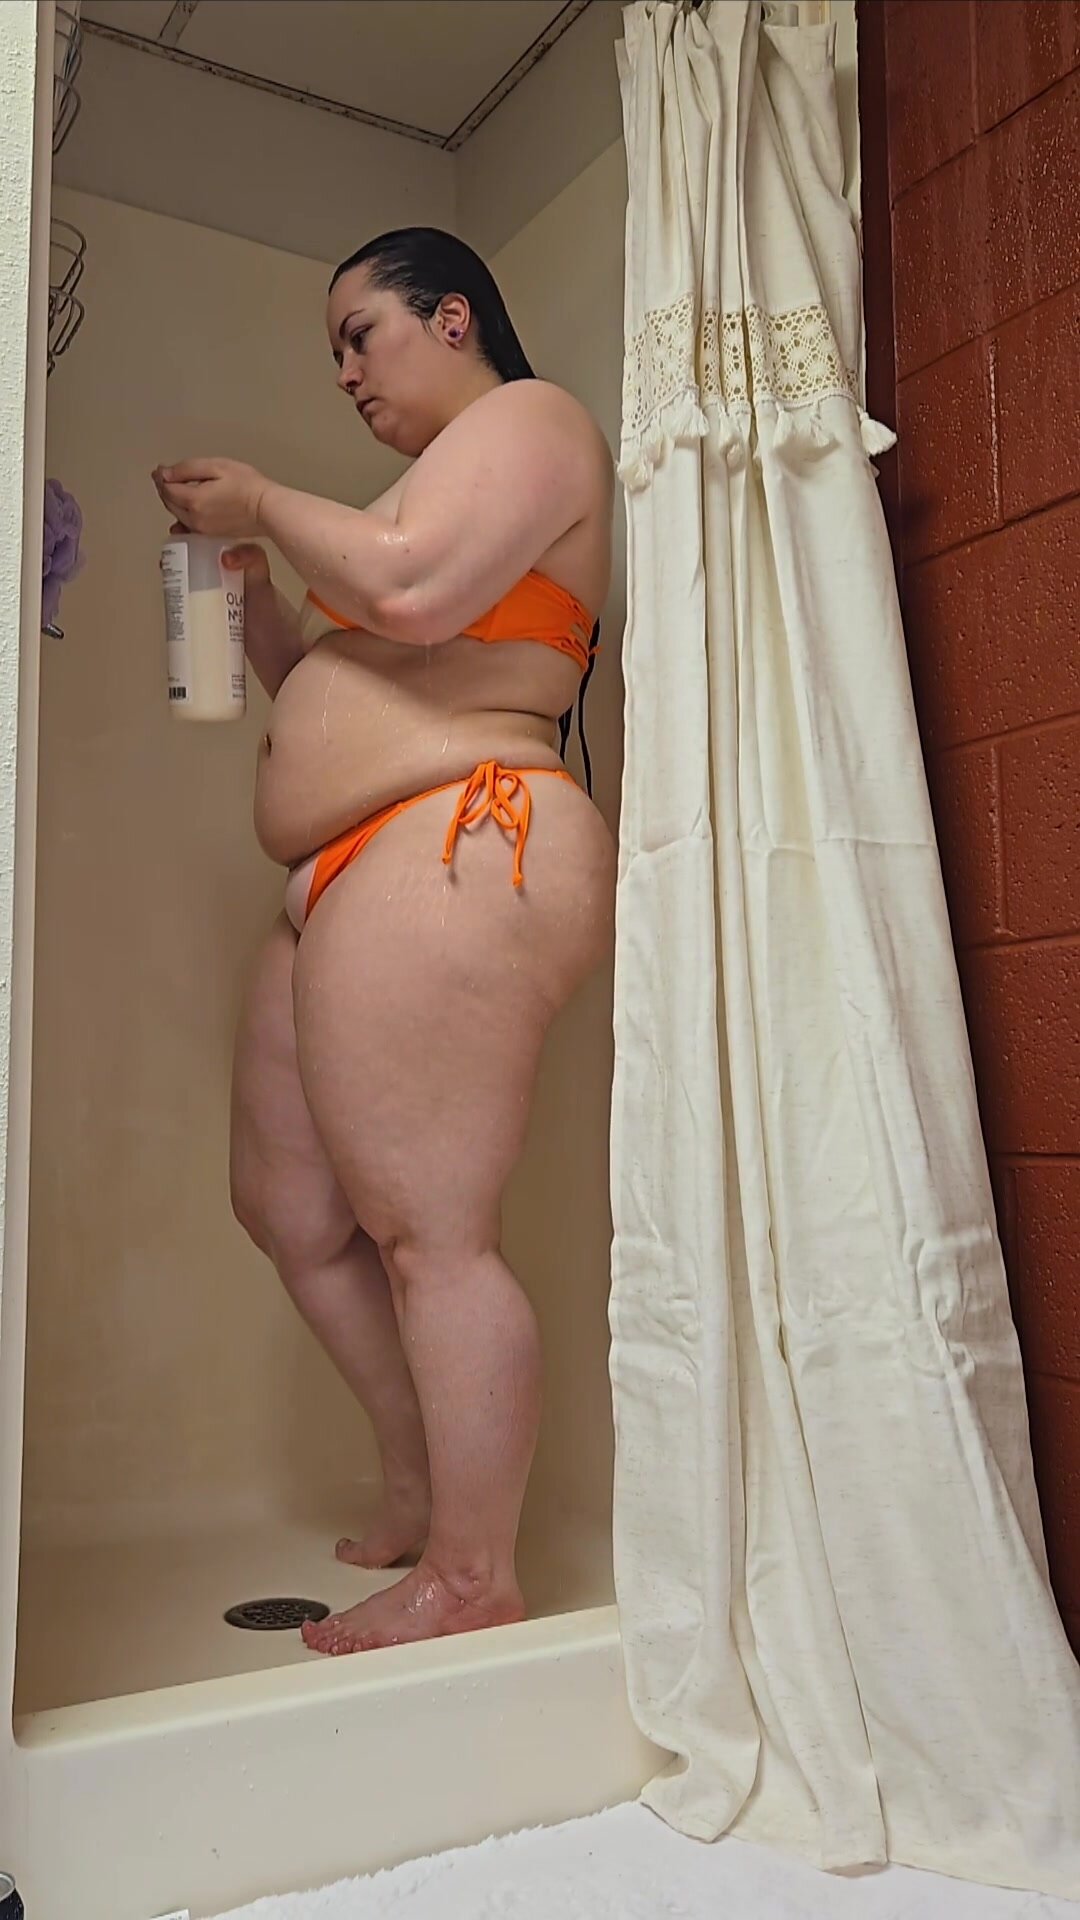 Big belly and ass burp in shower